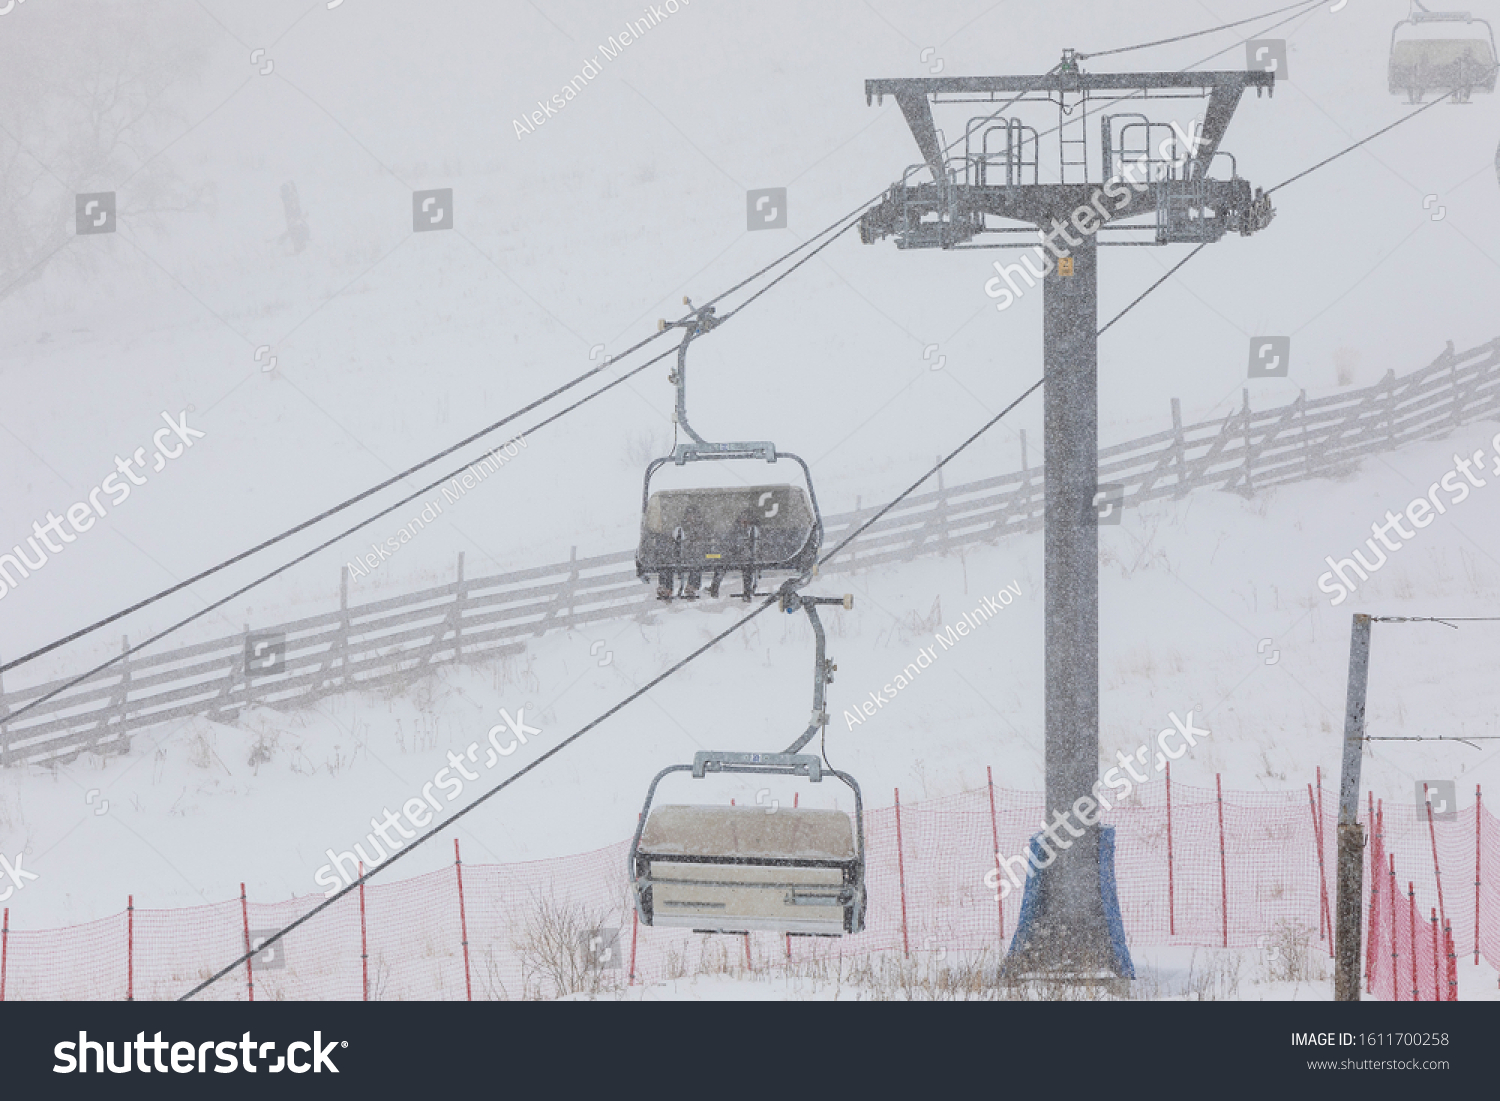 People climbing a cable car downhill in a snowfall #1611700258